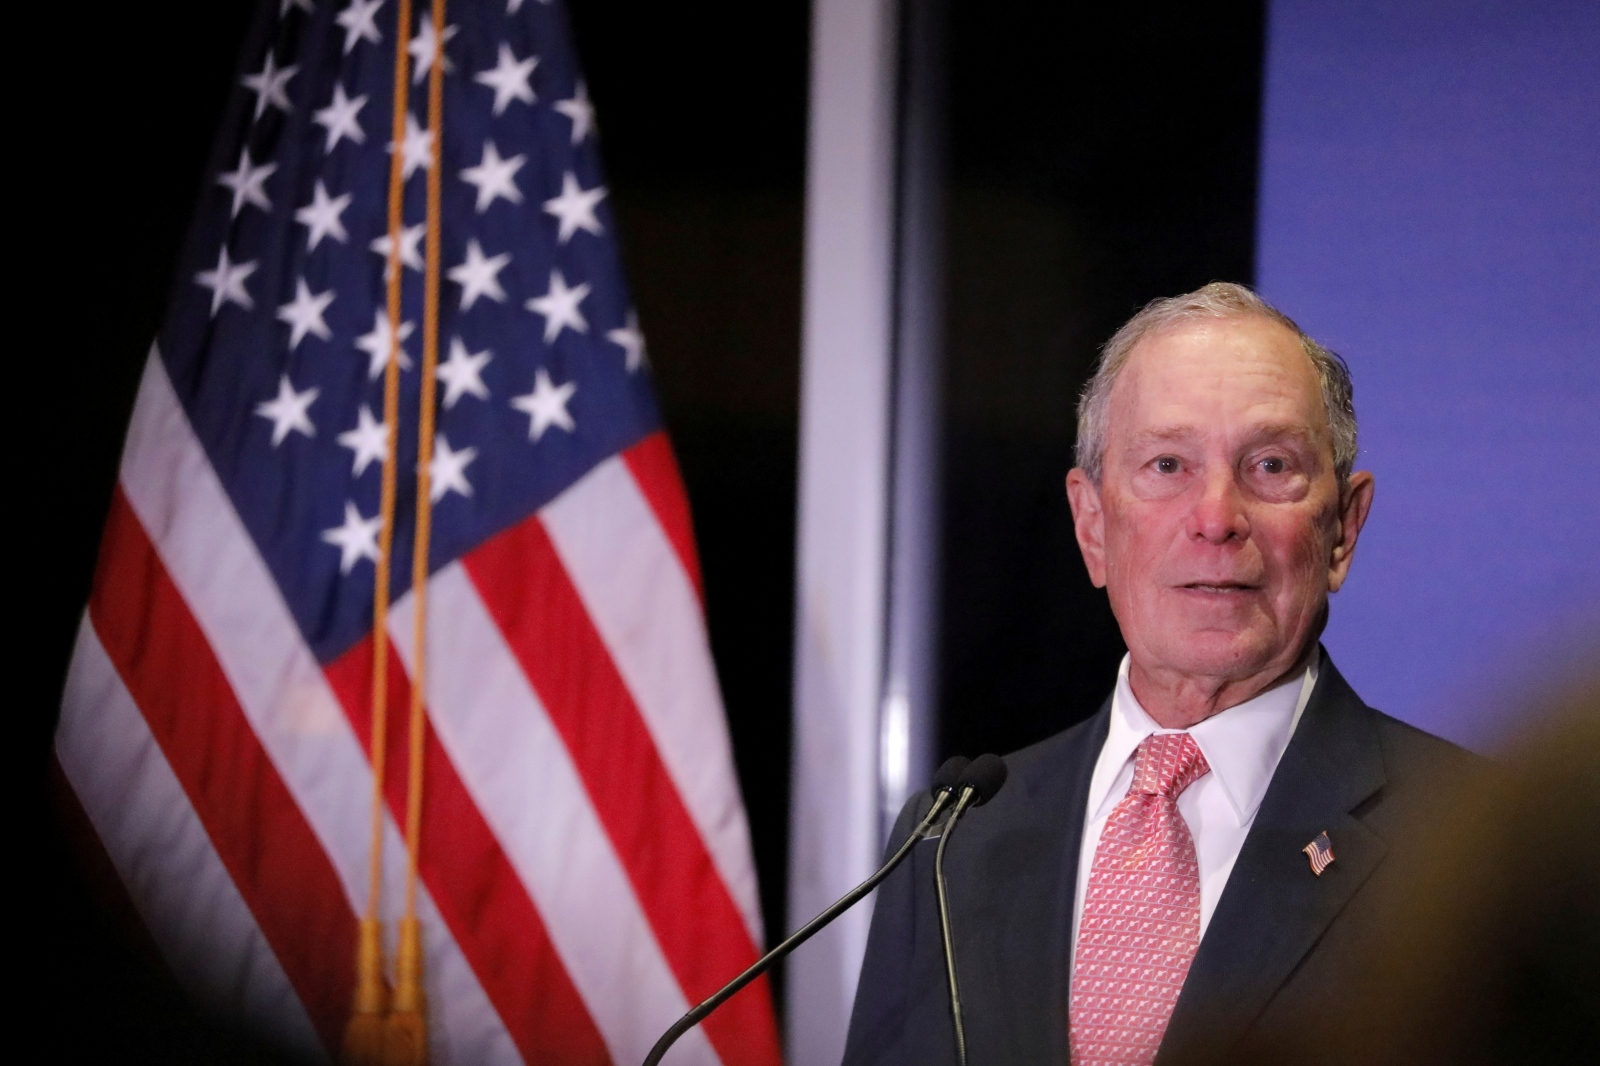 FILE PHOTO: Democratic U.S. presidential candidate Michael Bloomberg delivers remarks where he was honored by the Iron Hills Civic Association at the Richmond County Country Club in Staten Island, New York FILE PHOTO: Democratic U.S. presidential candidate Michael Bloomberg delivers remarks where he was honored by the Iron Hills Civic Association at the Richmond County Country Club in Staten Island, New York, U.S., December 4, 2019. REUTERS/Andrew Kelly/File Photo Andrew Kelly